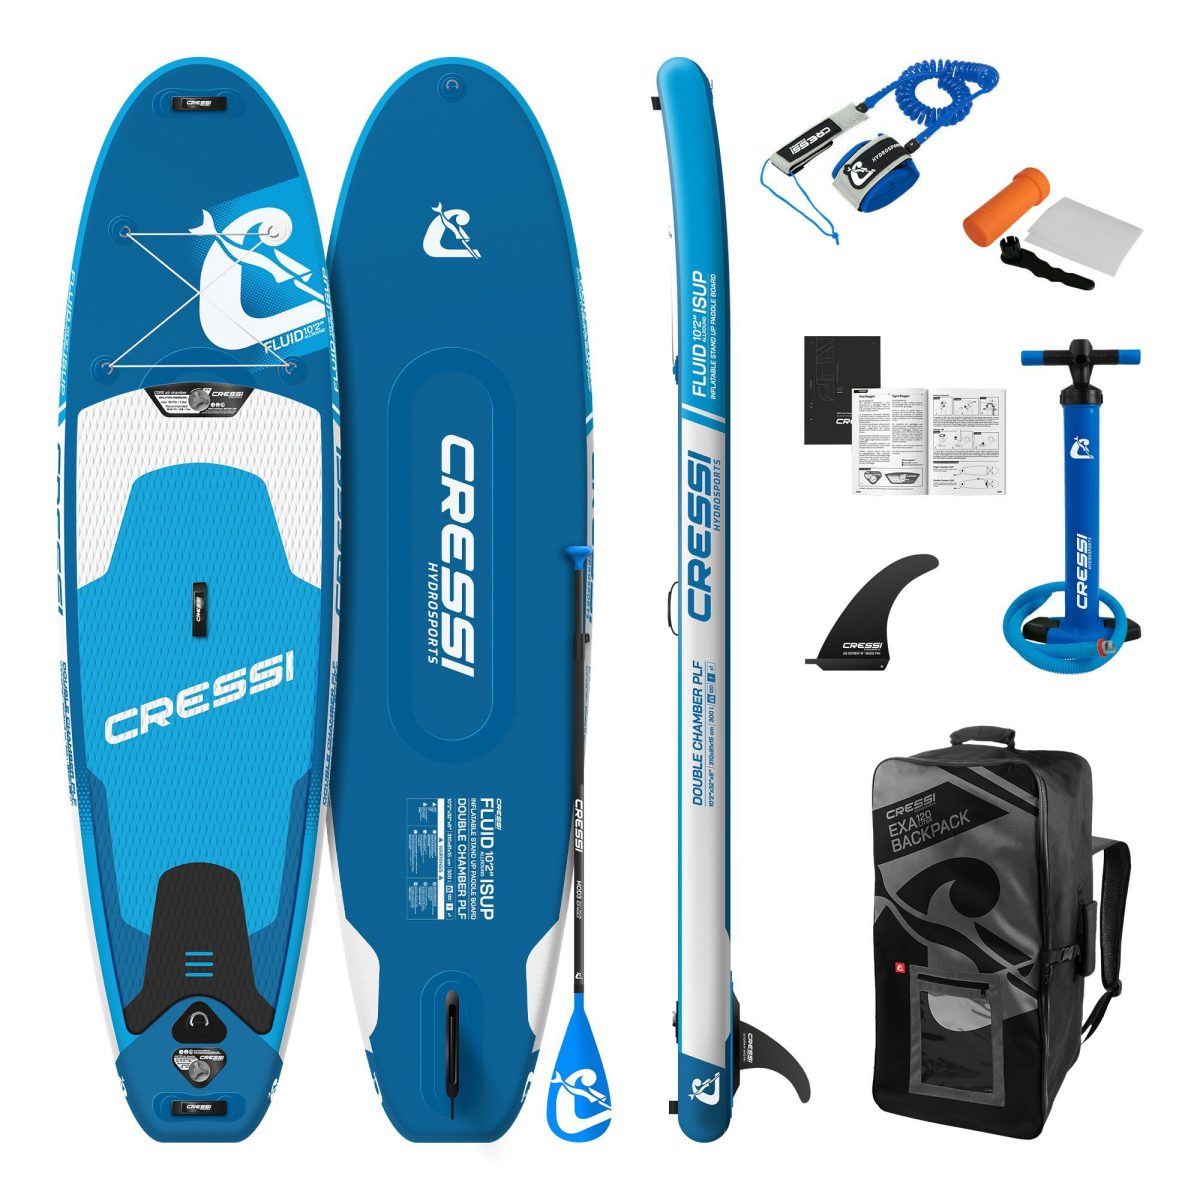 Cressi Fluid Inflatable All Round Stand-Up Paddleboard Kit